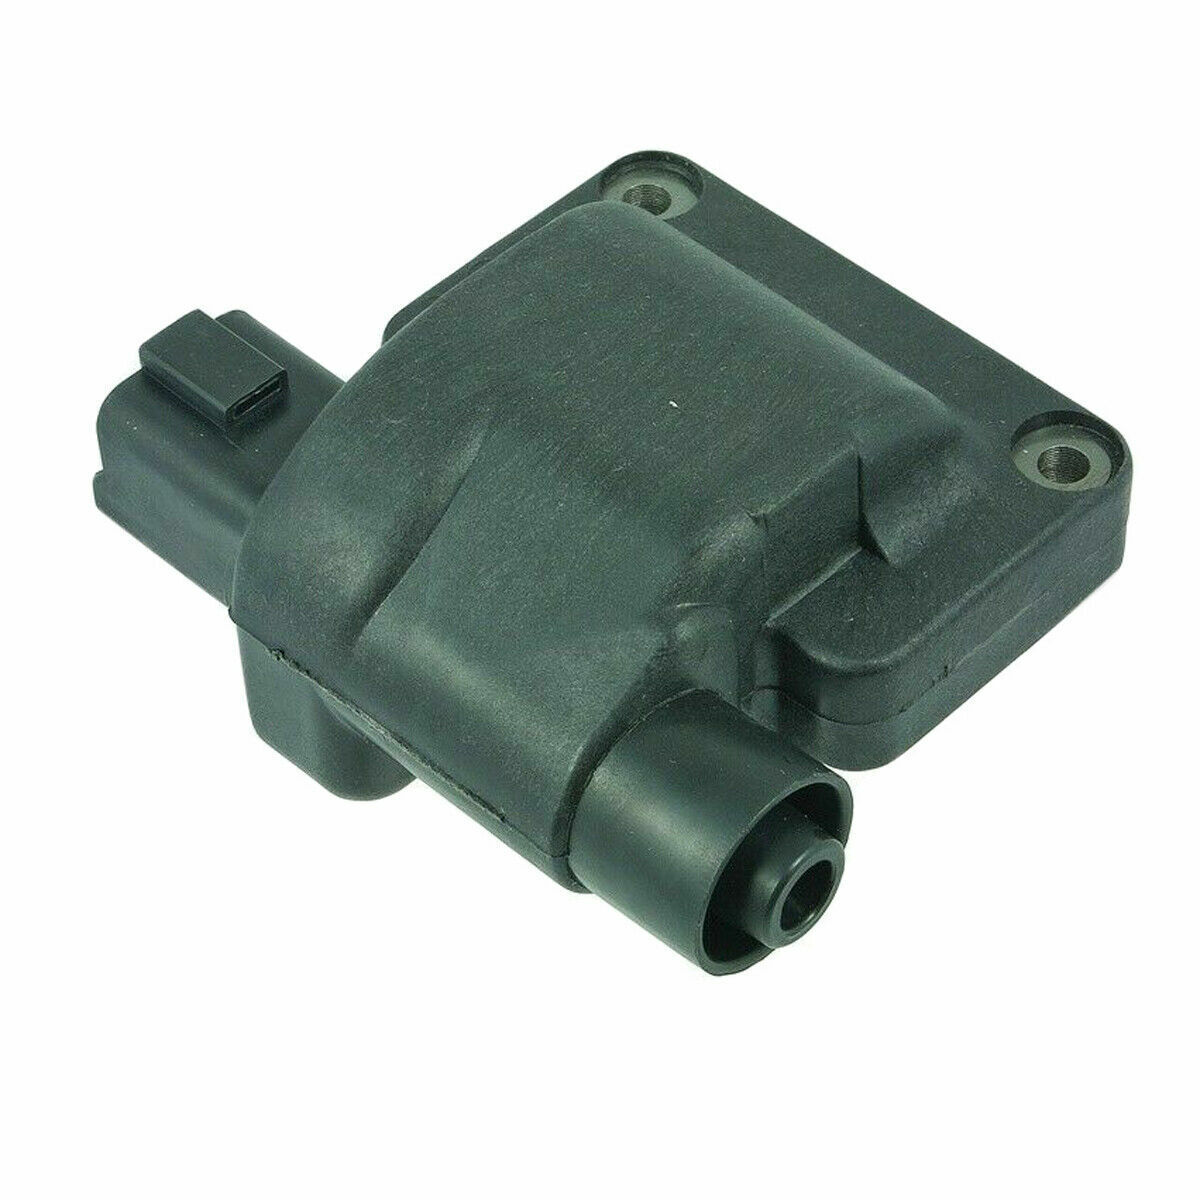 New High Quality Ignition Coil Fit Legend Honda 87-83 Acura 90 30520PH6902